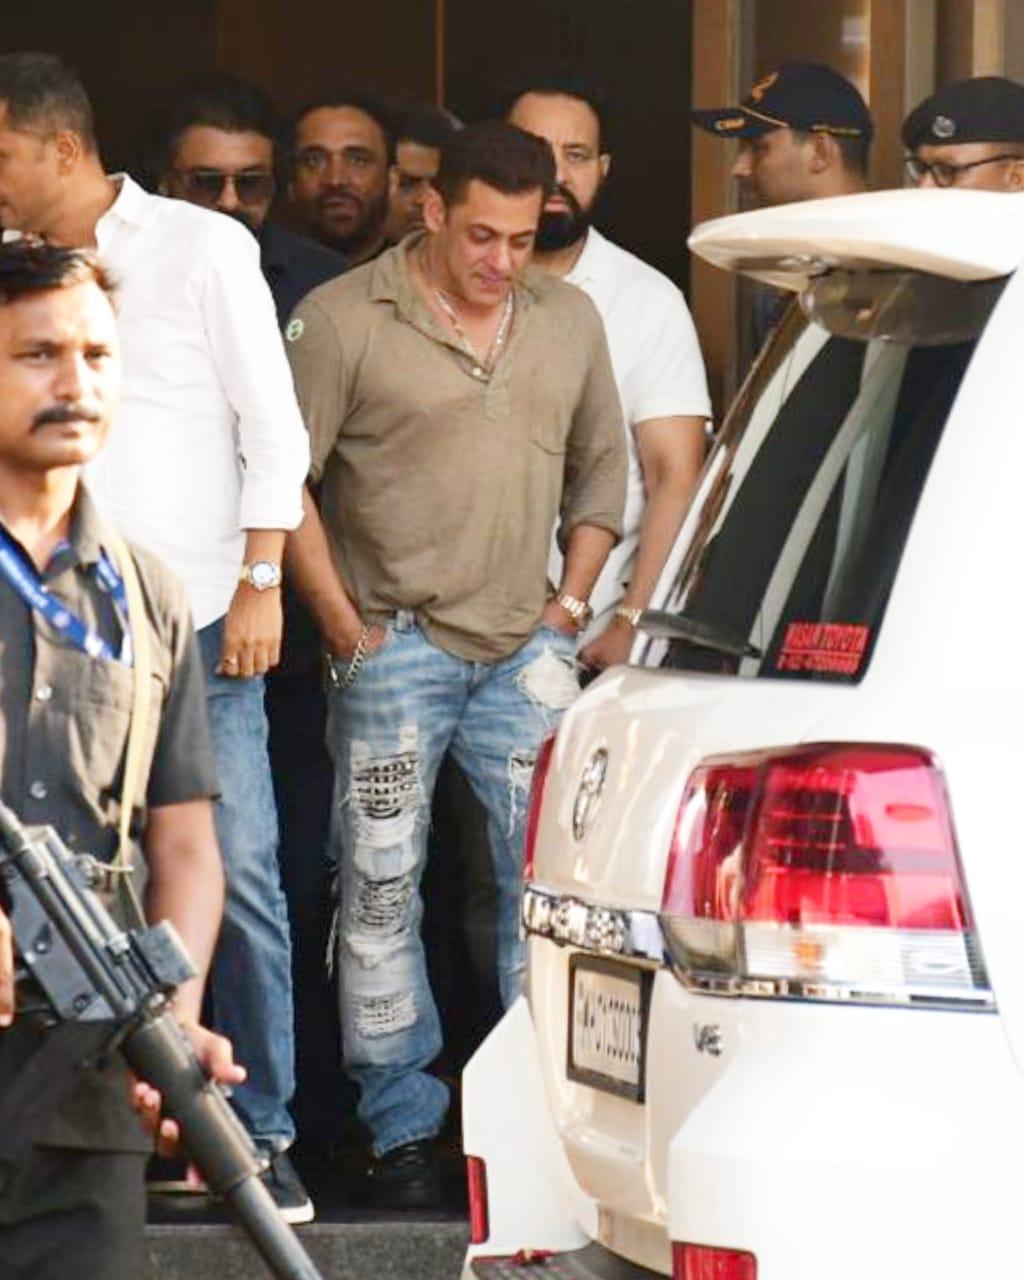 Salman Khan made a Dabangg entry at the Kalina airport today. The superstar opted for a casual look in an olive t-shirt and jeans